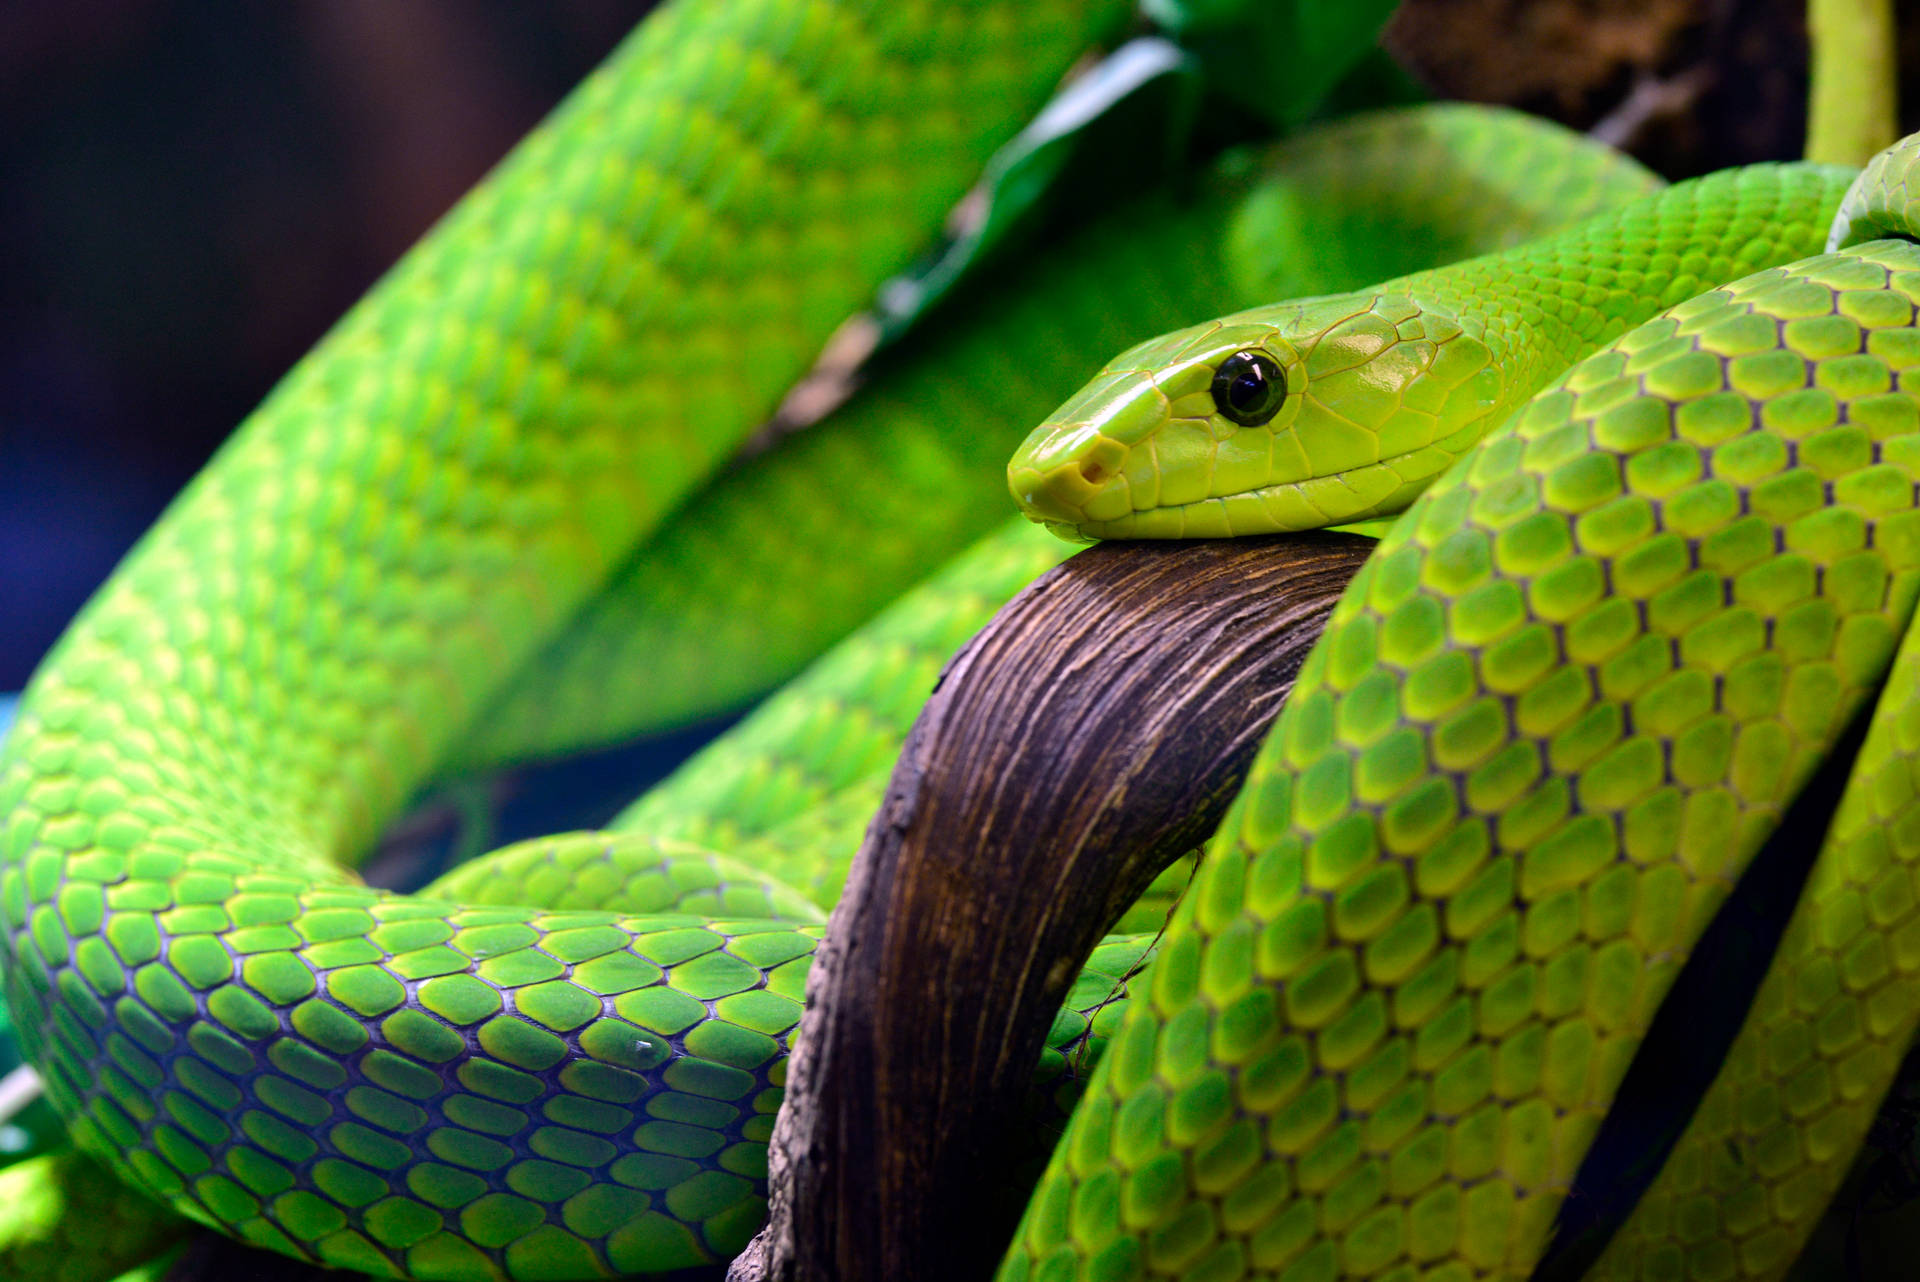 Stunning Green Scaly Snake Background